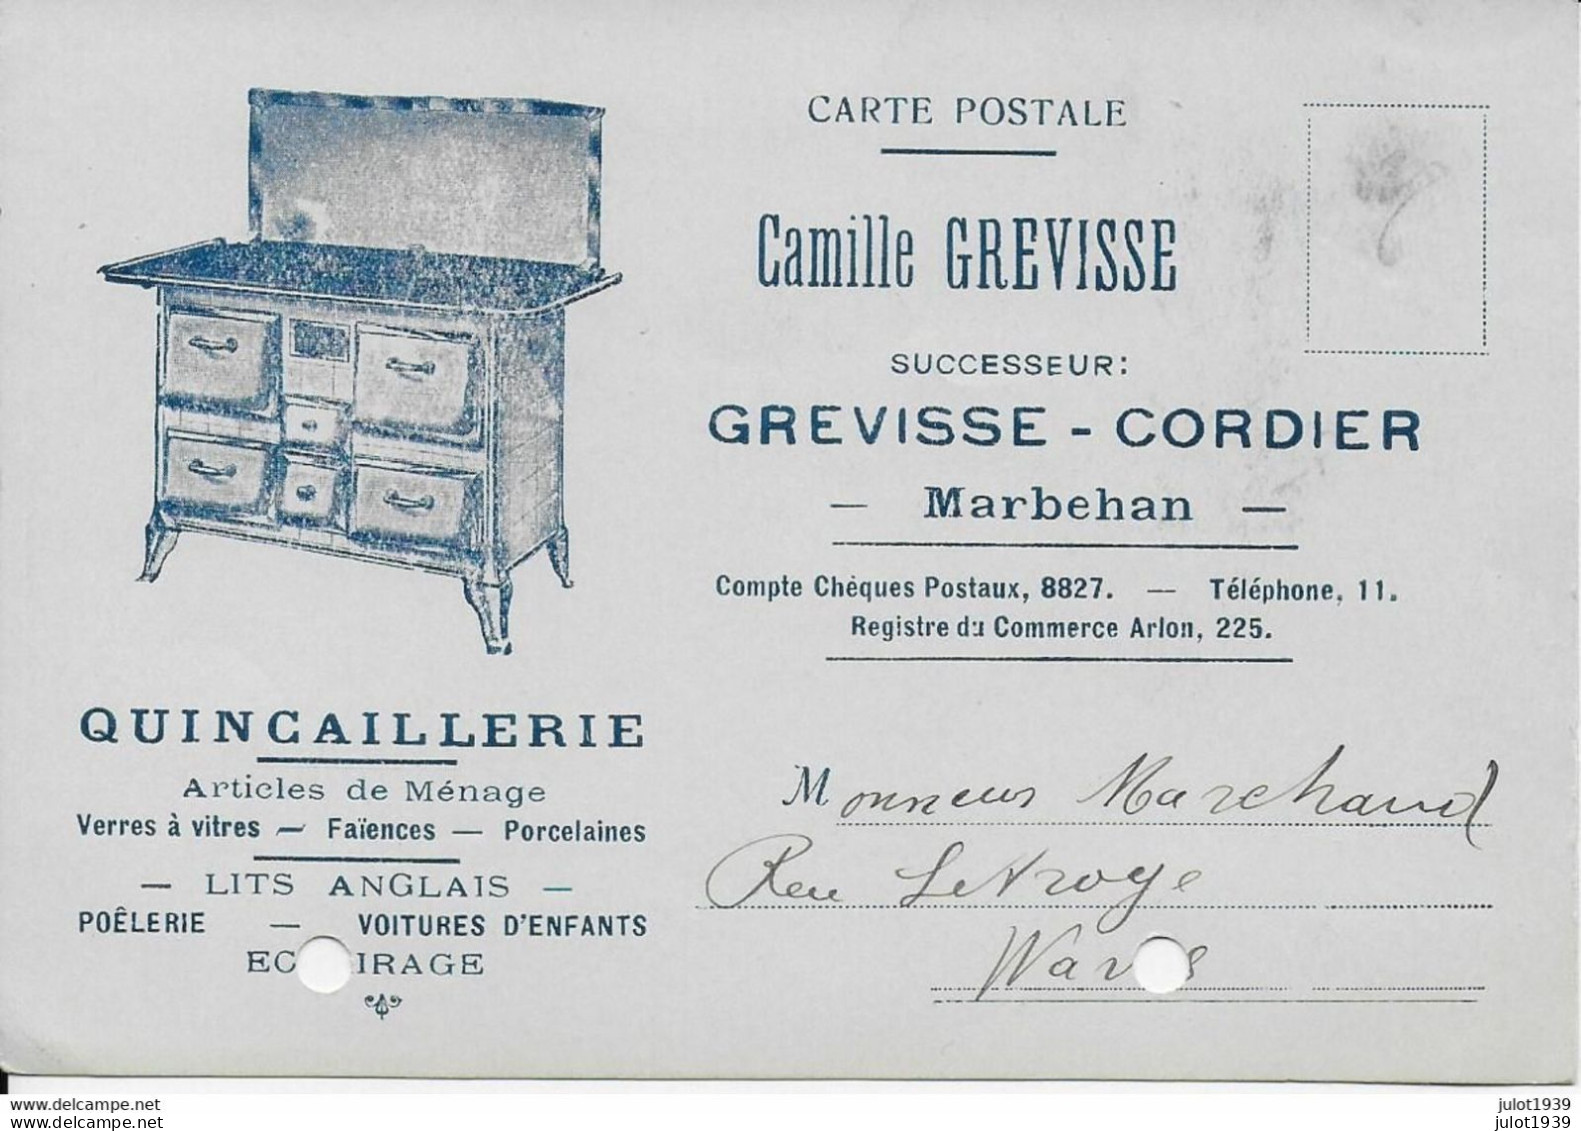 MARBEHAN . HABAY ..-- Quincaillerie Camille GREVISSE - CORDIER . 1935 Vers WAVRE ( Mr MARCHAND ) . Voir Verso . - Habay